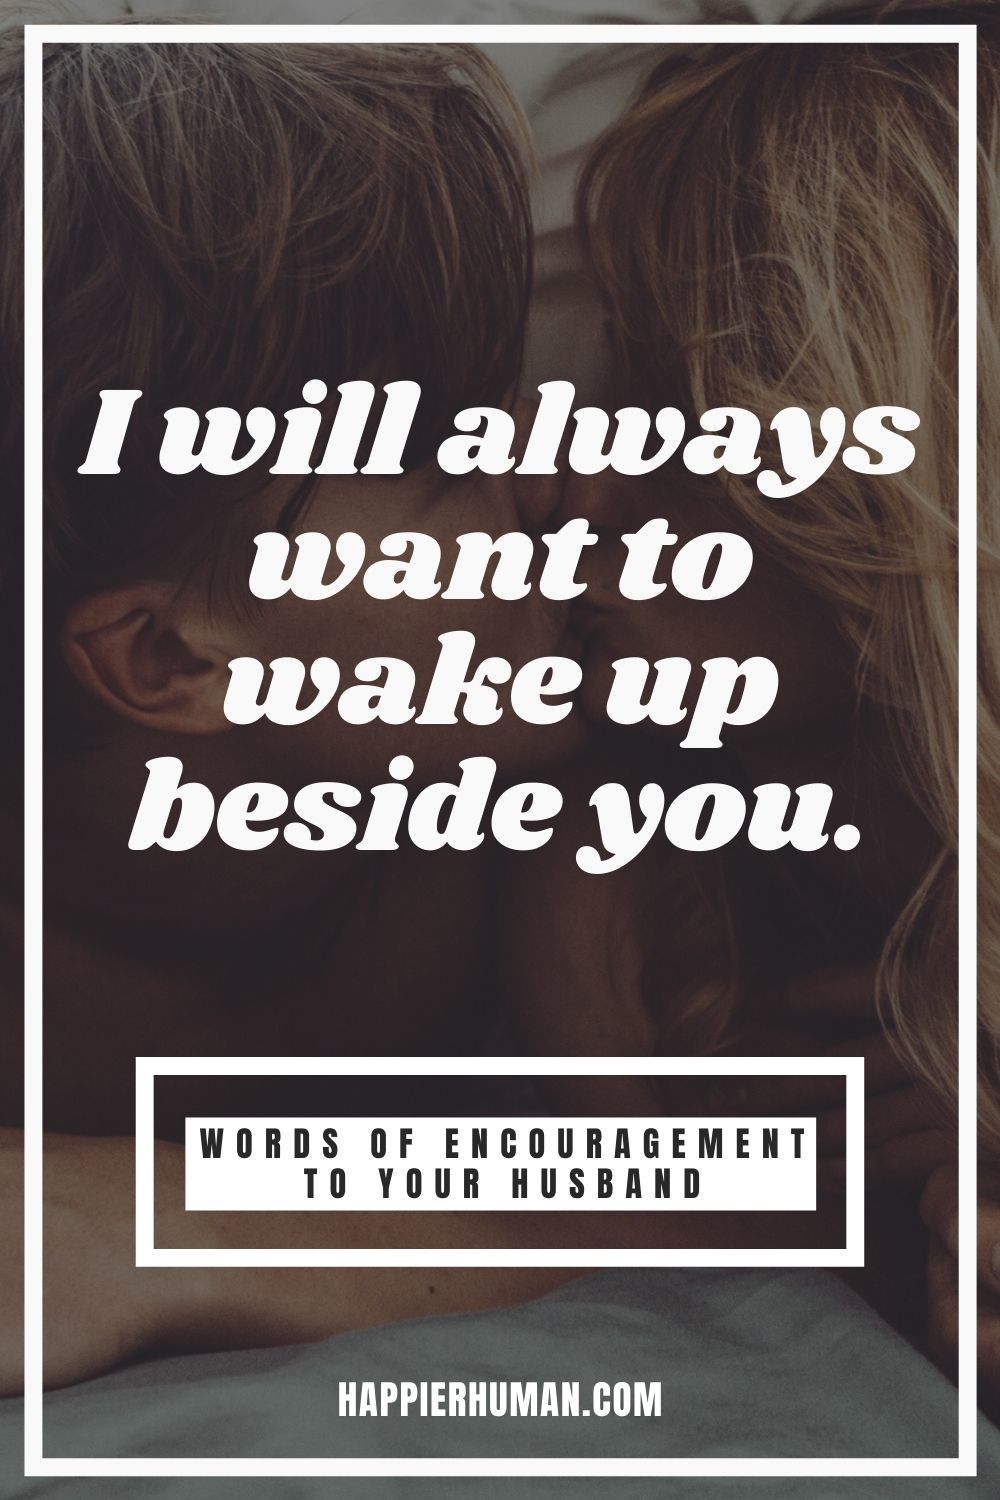 Words of Encouragement for Husbands - I will always want to wake up beside you. | words of encouragement for husbands | lovable words for husband | encouraging scriptures for husbands